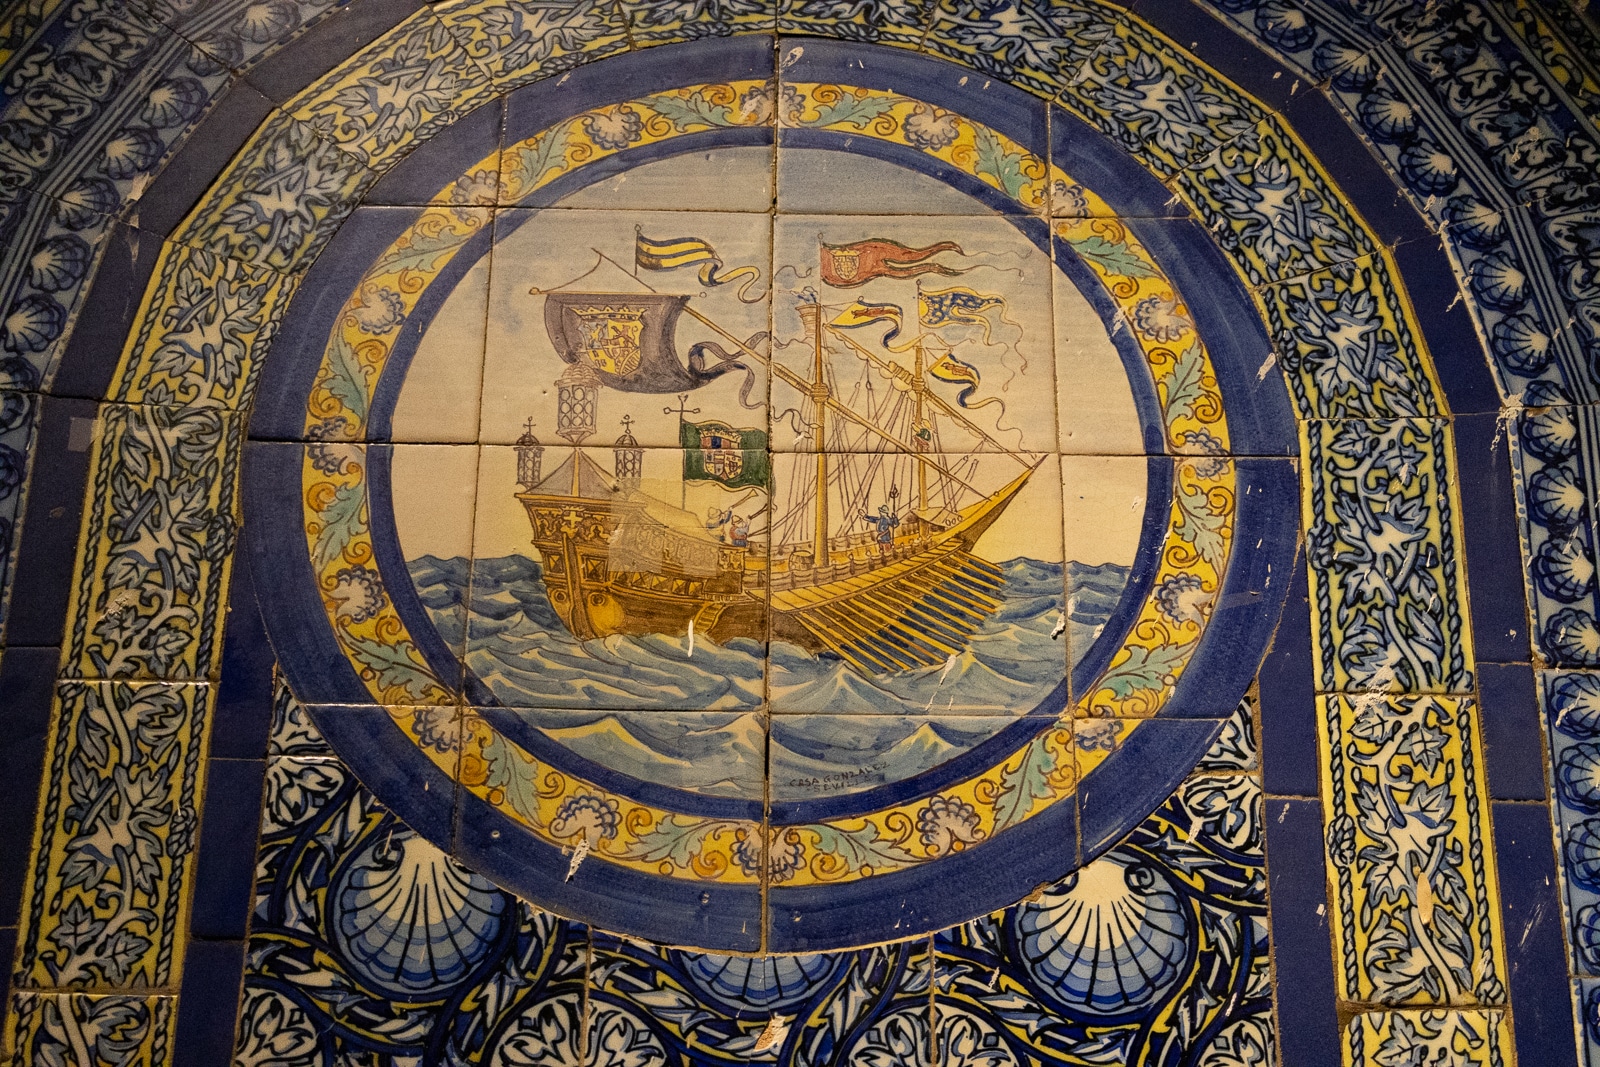 blue and yellow tiles with a ship in the center panel